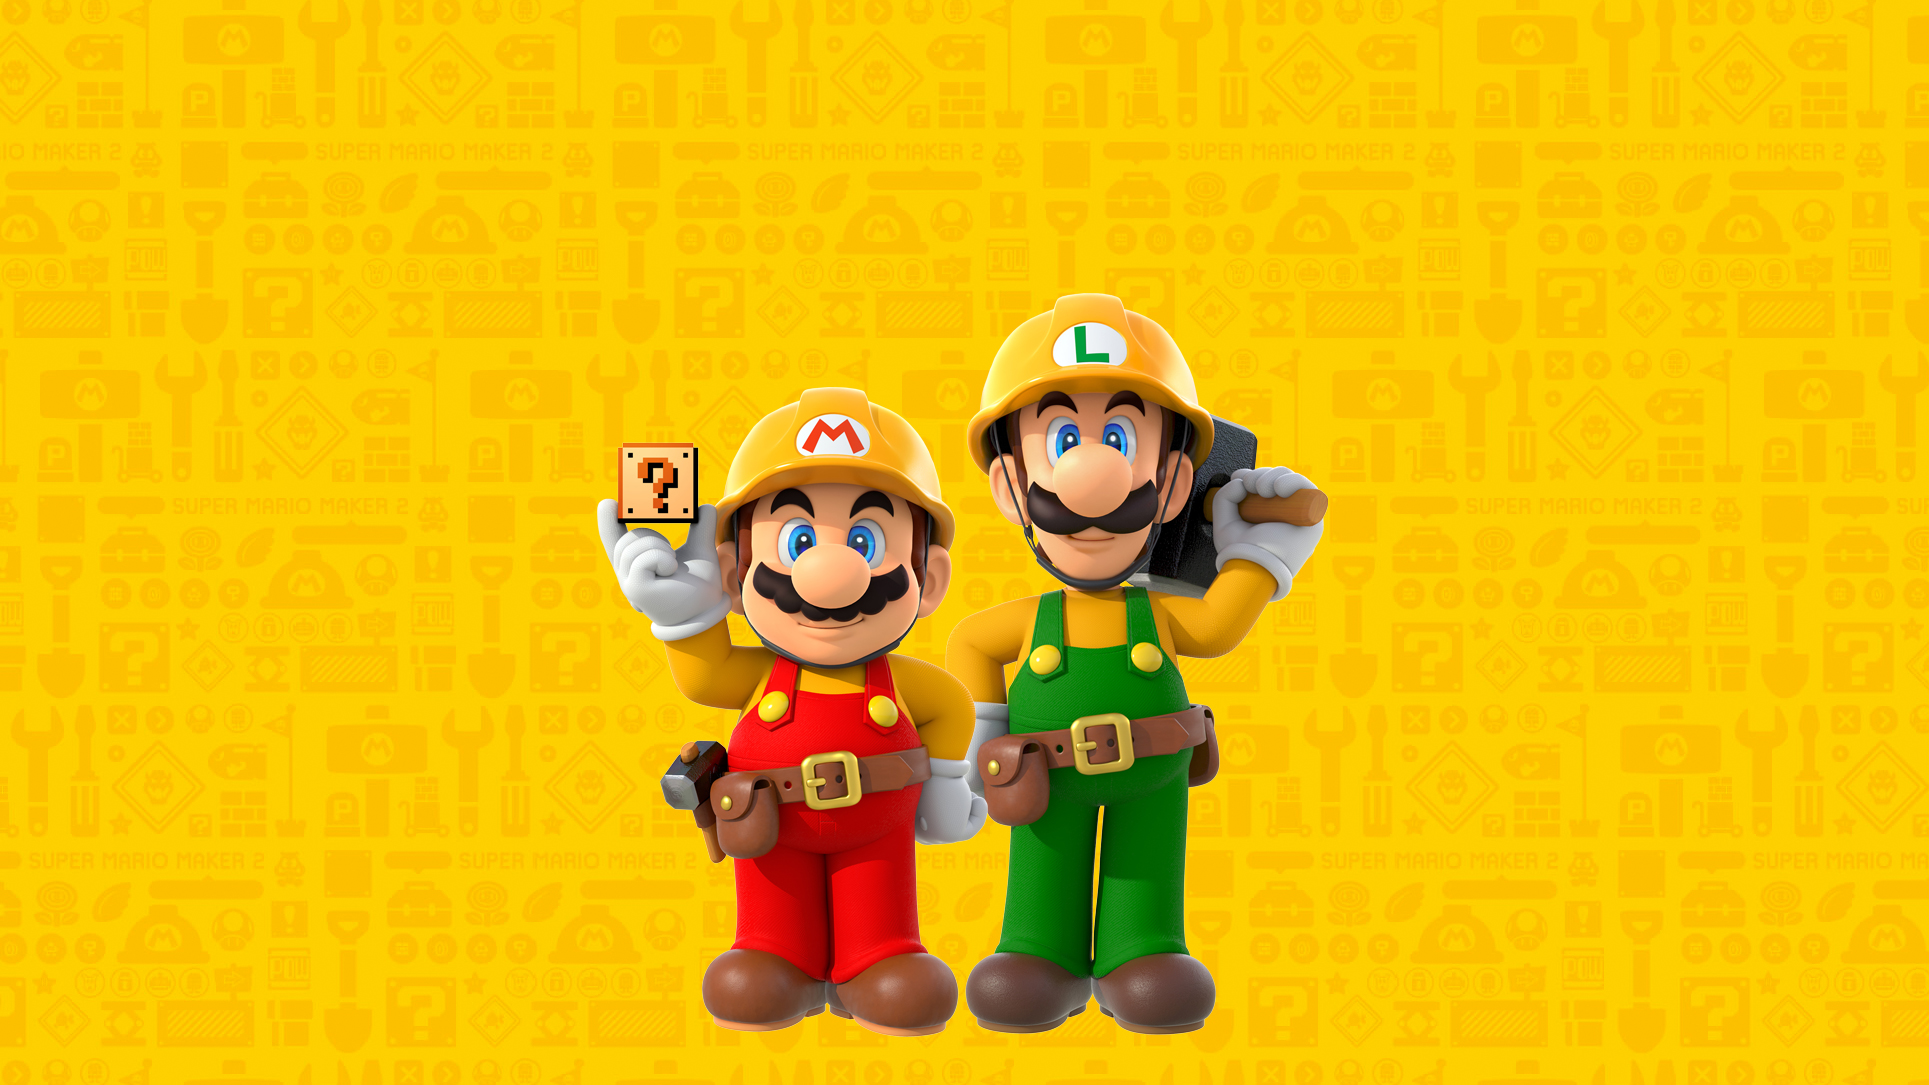 super mario brother game online free